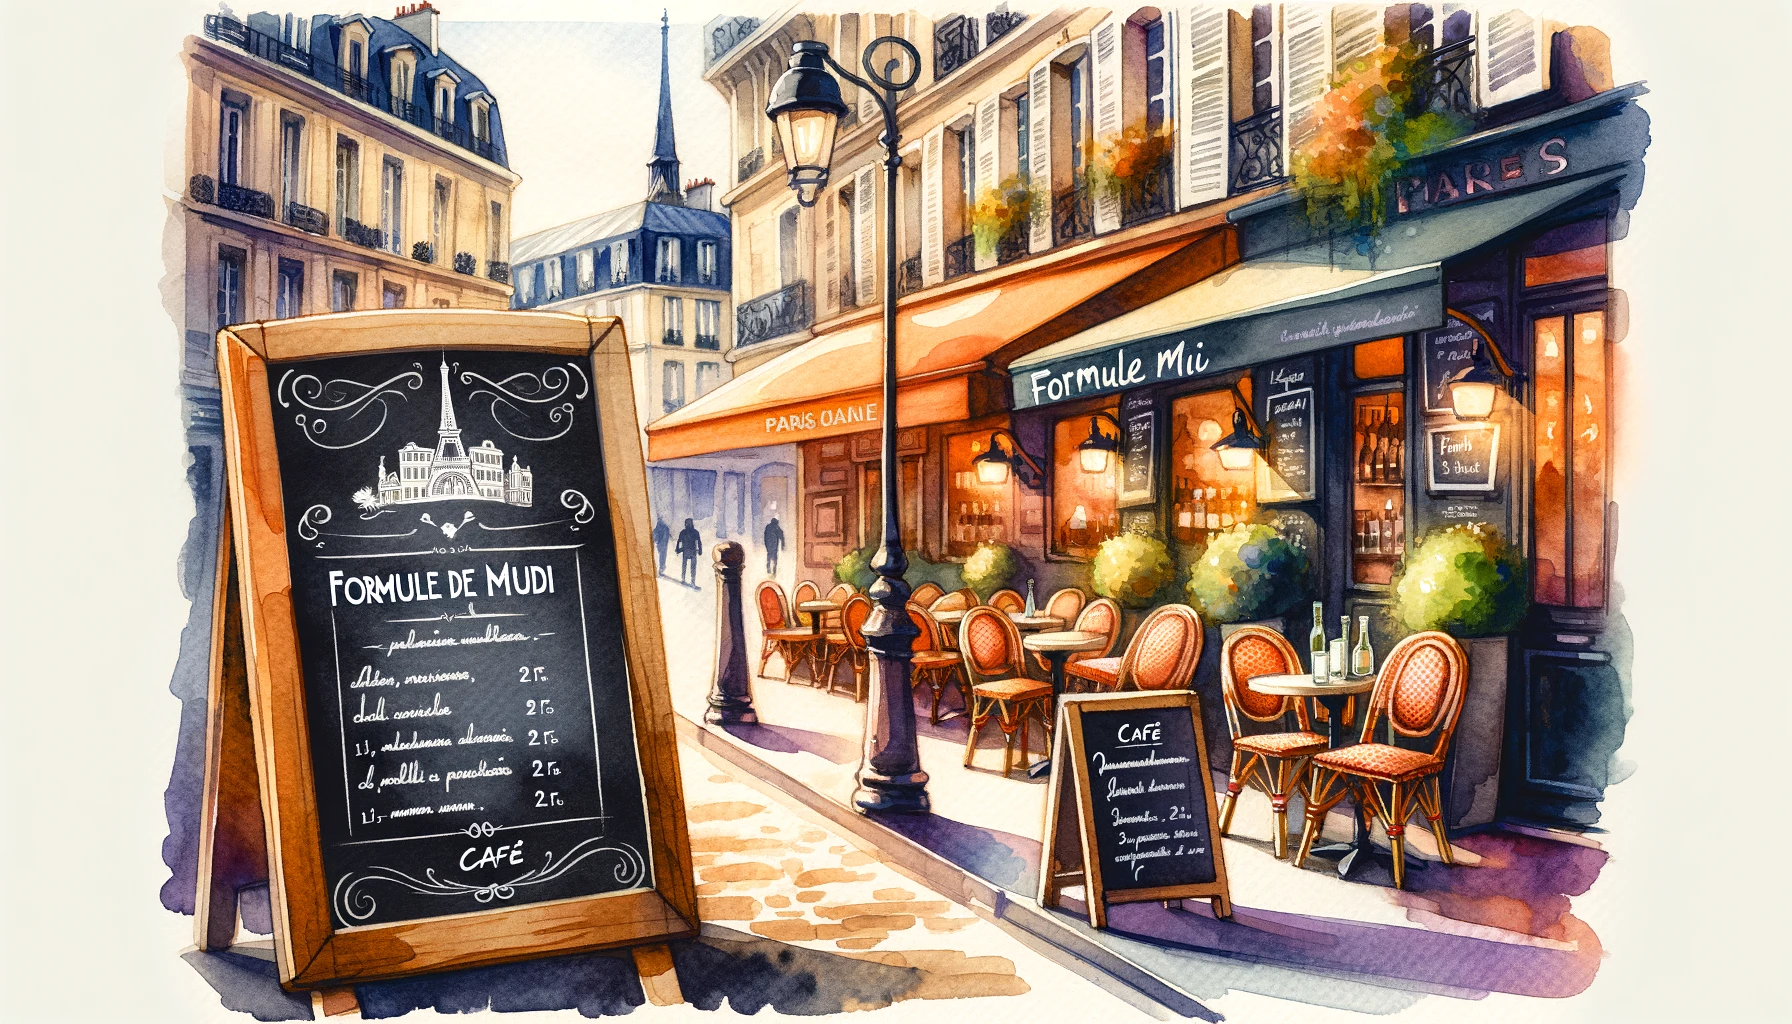 DALL·E 2024 03 13 23.10.18 Create an illustration in watercolor style depicting a chalkboard menu with Formule de Midi written on it positioned outside a quaint Parisian cafe Eat Like The French! March 13, 2024